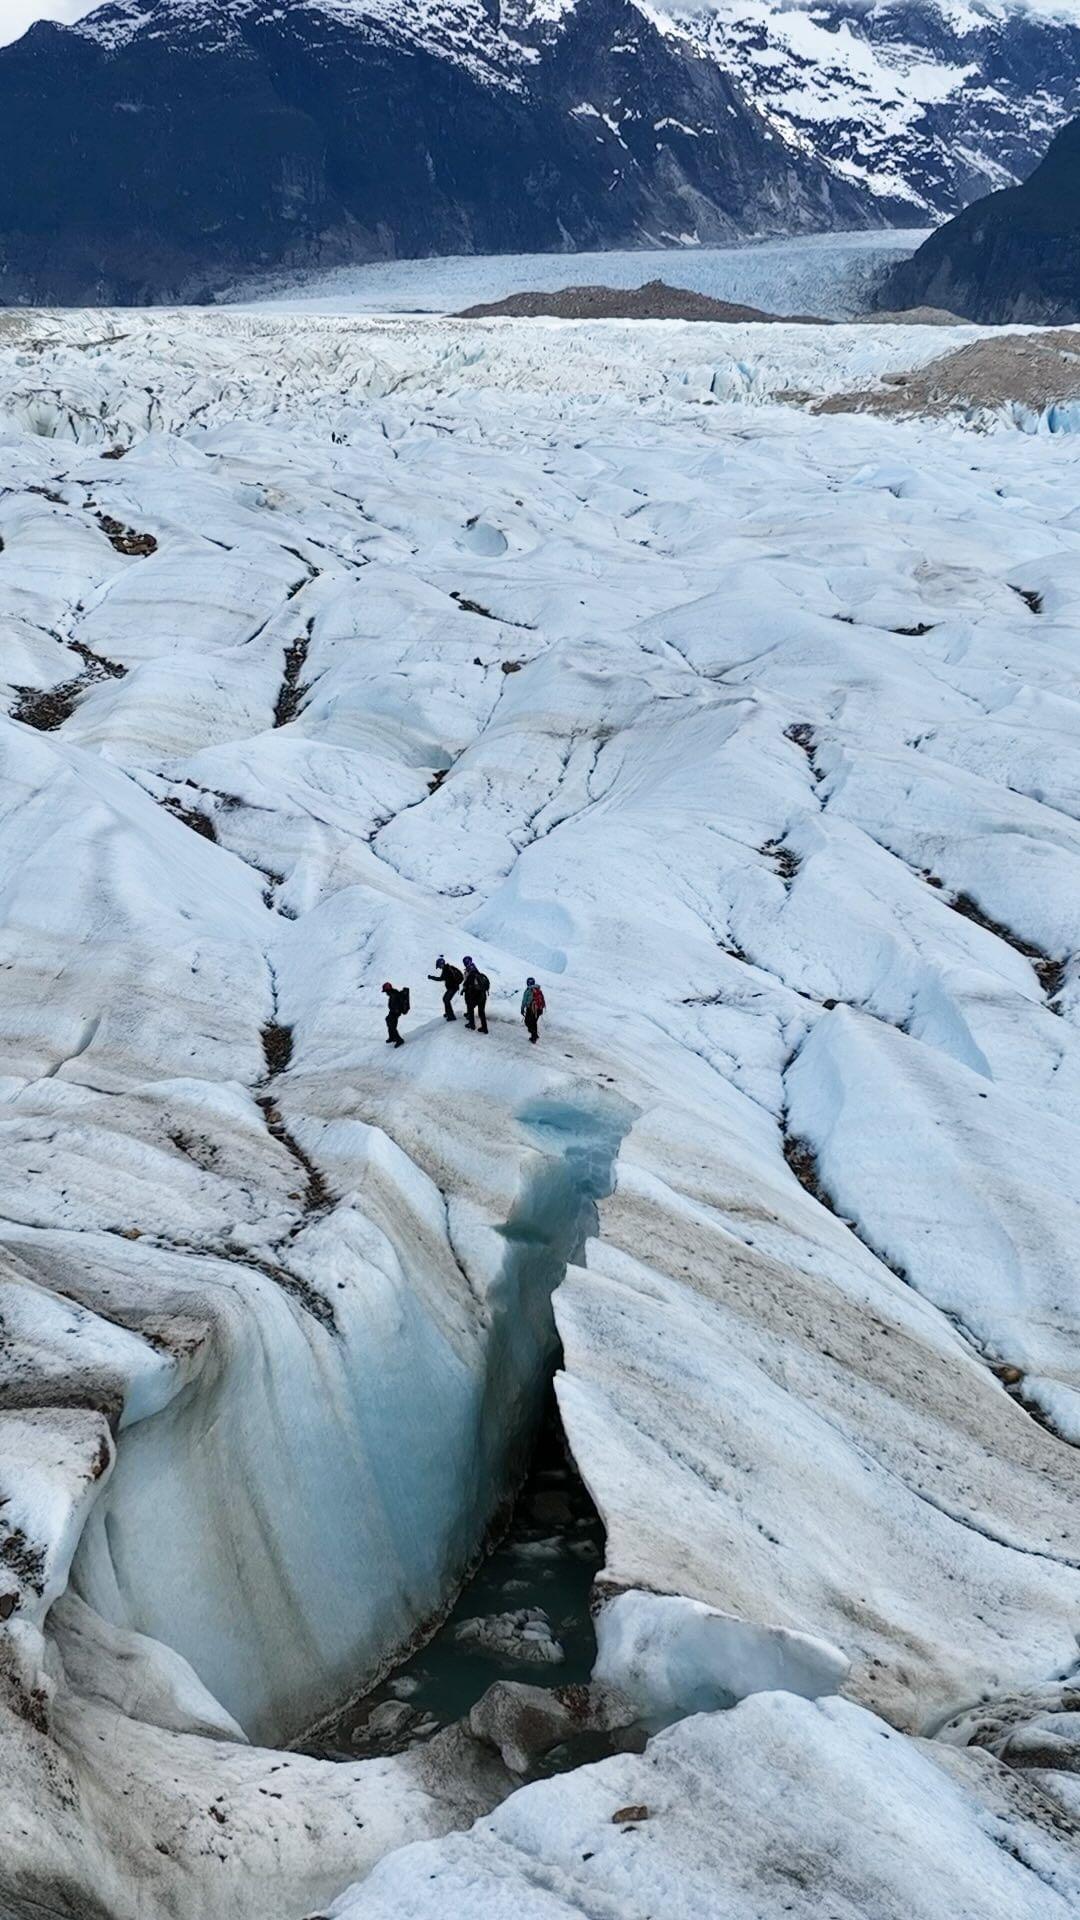 Did you know that Chile has the third largest continental ice extension, after only Antarctica and Greenland?

See Nat Geo photographer @tamaramerino_photography trek a glacier in Chile as part of our Best of the World 2024 top travel experiences.

Learn more about our #BestOfTheWorld 2024 guide at the link in bio.